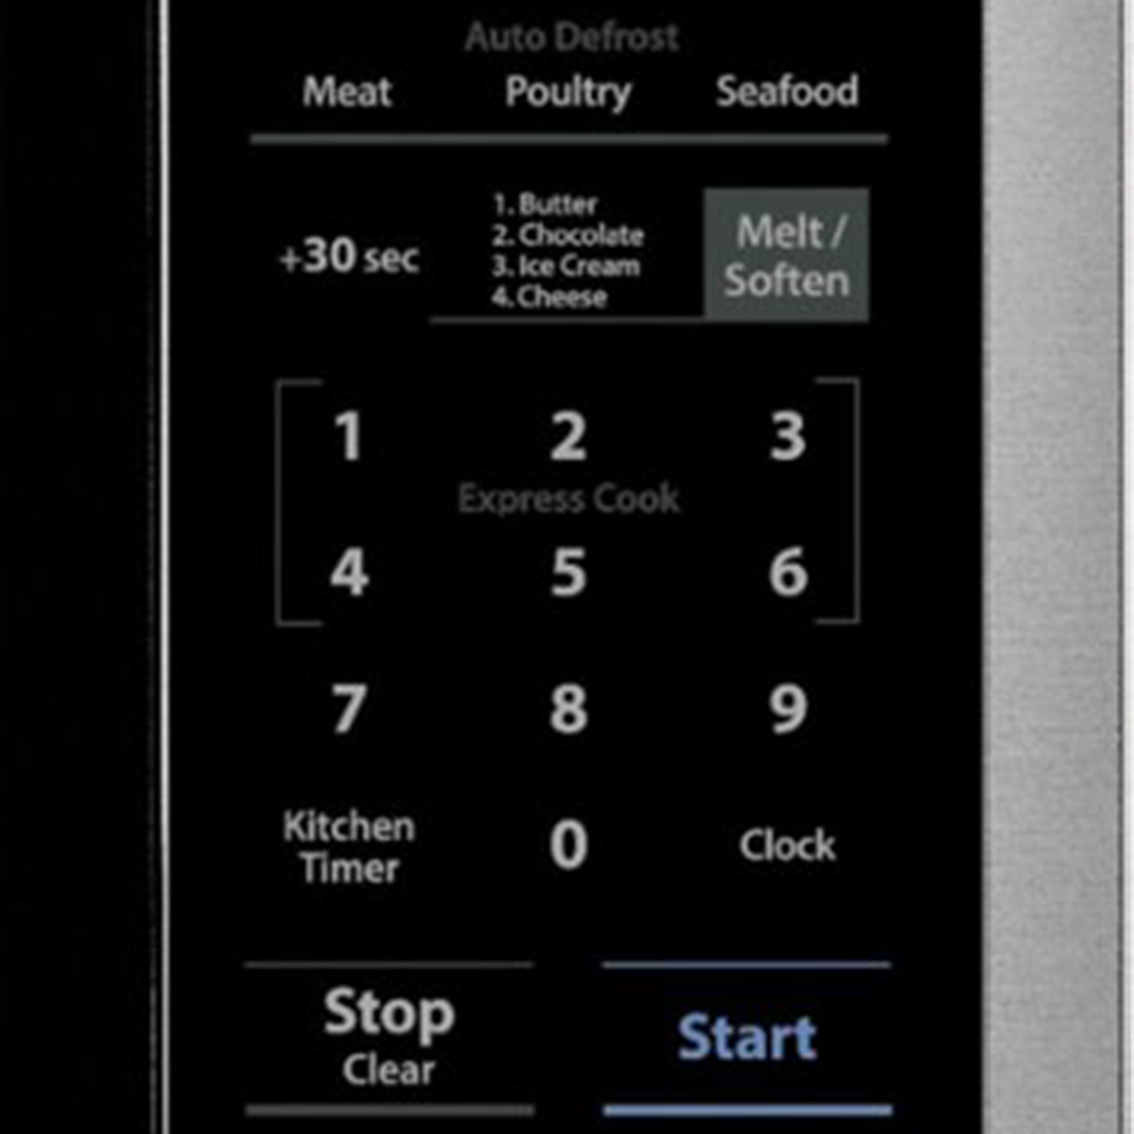 Sharp 2.2 cu. ft. Stainless Steel Microwave - Image 5 of 5